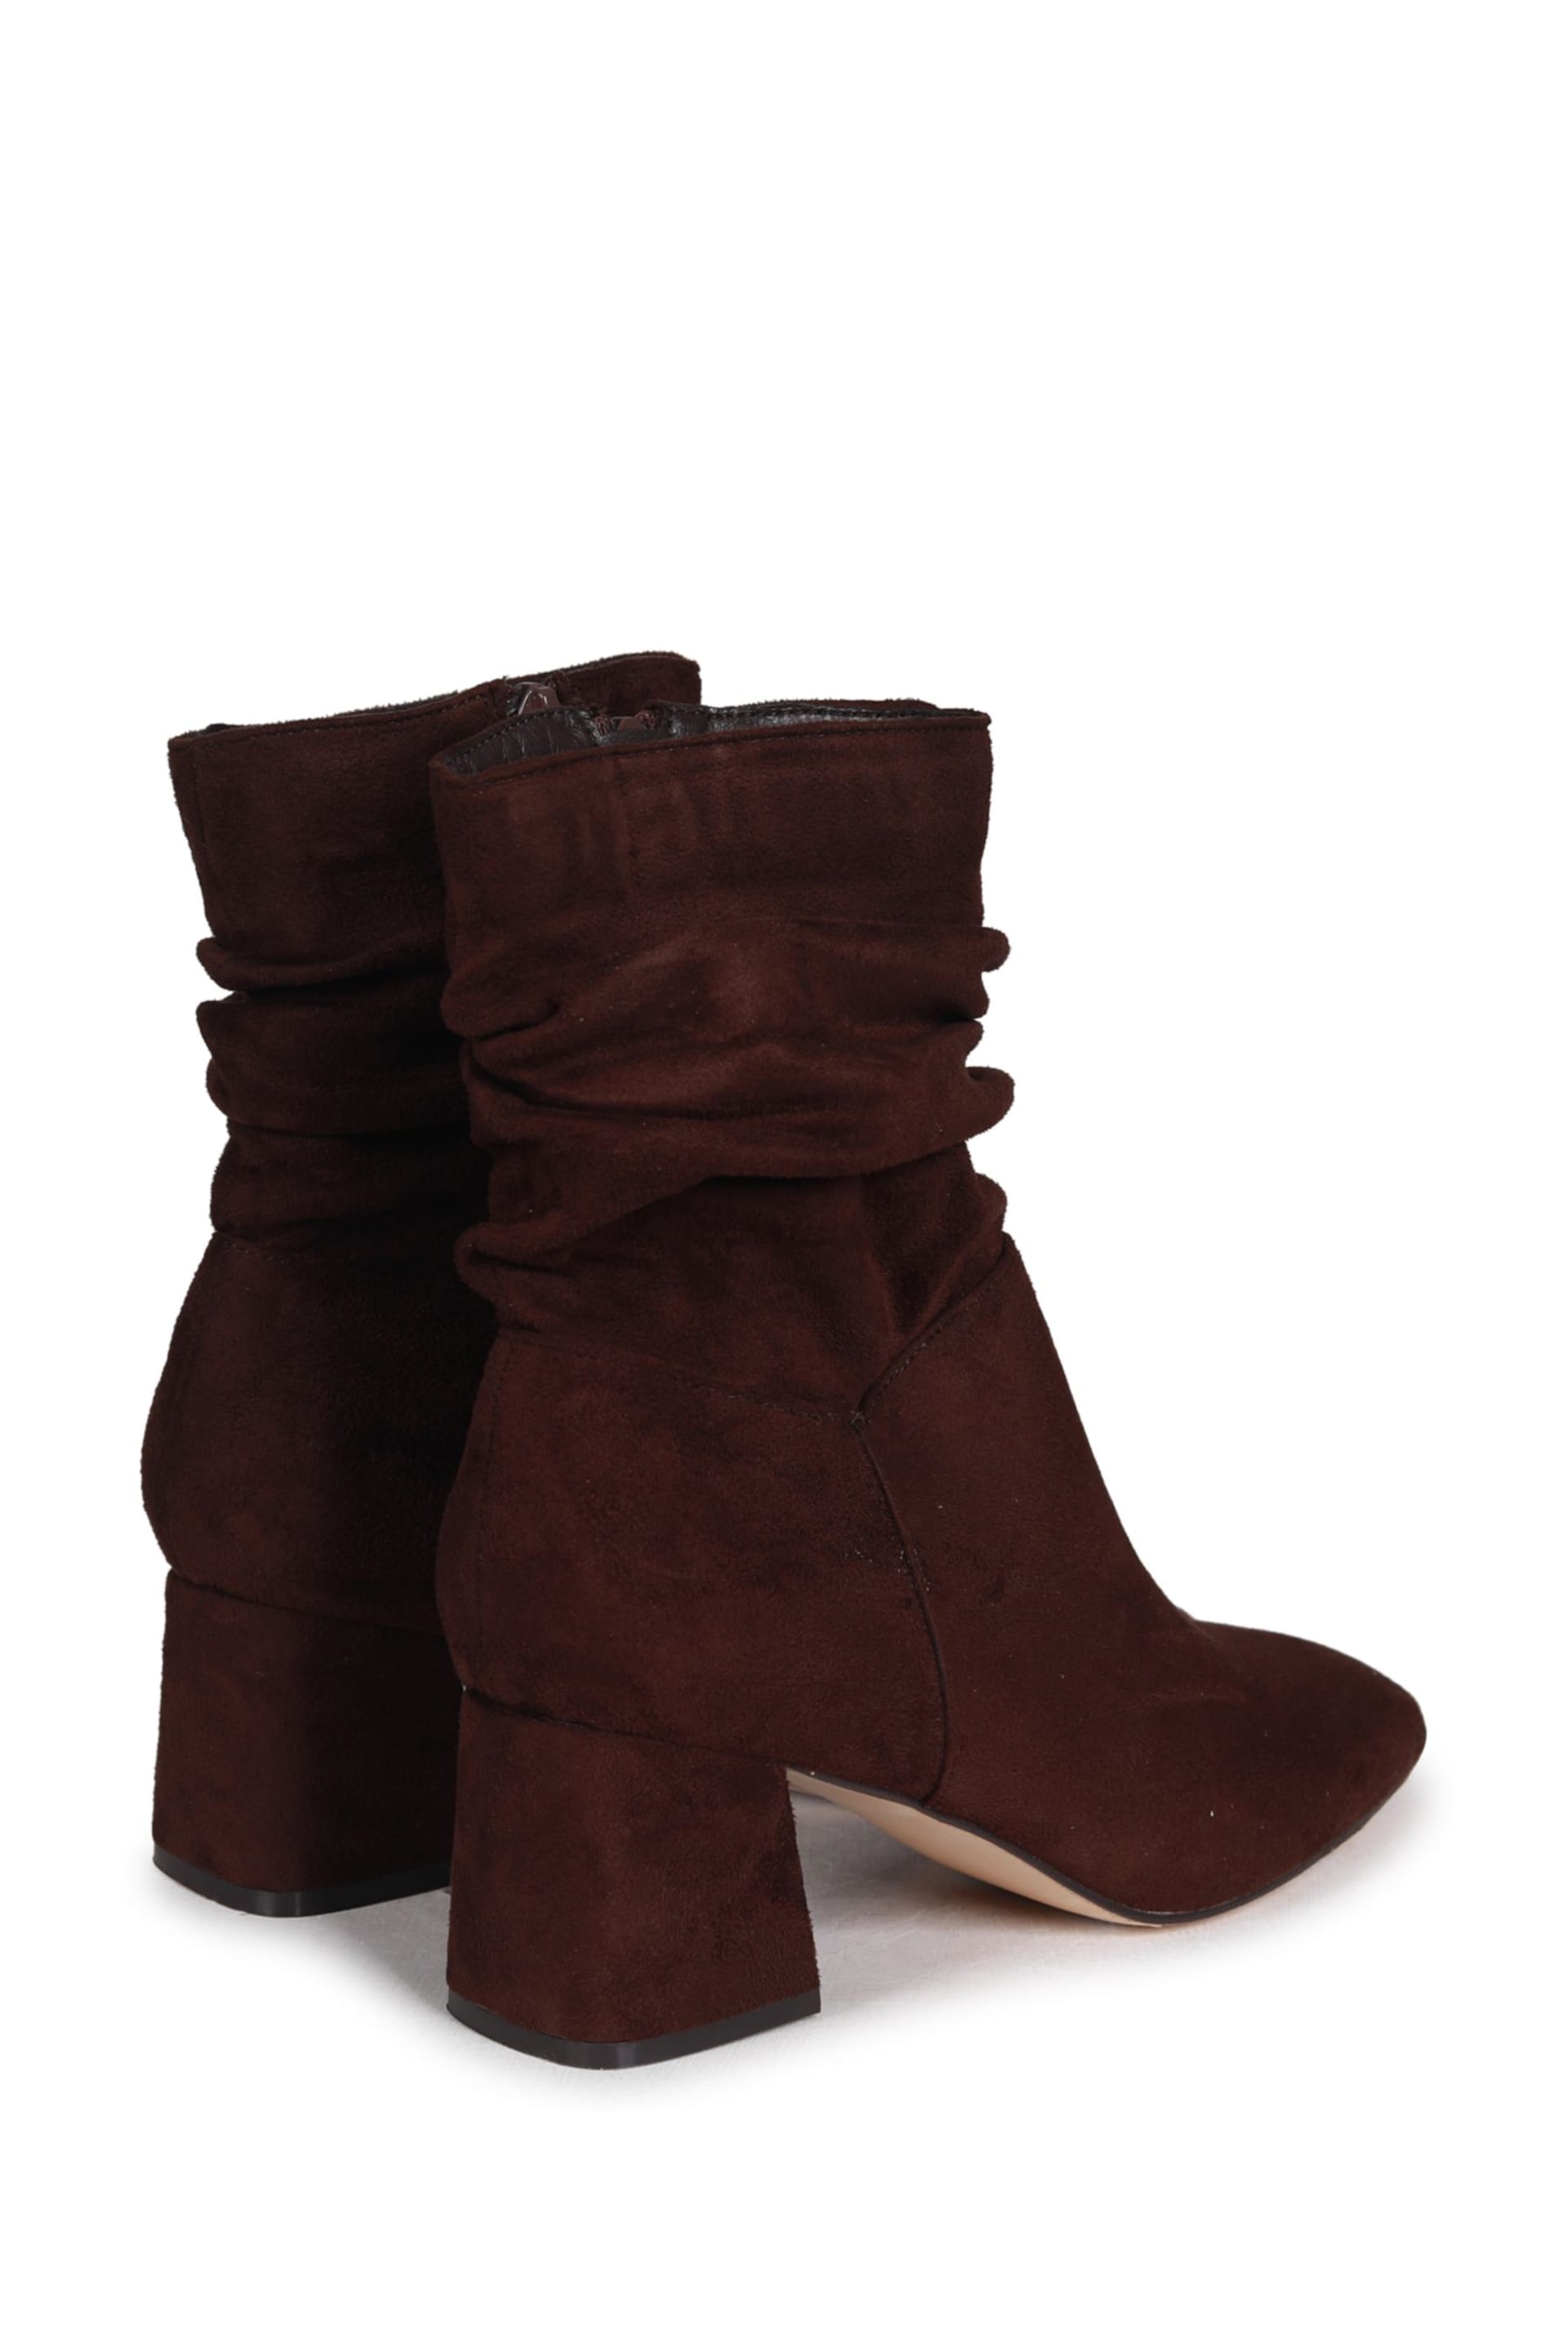 Linzi Brown Aster Ruched Heeled Ankle Boots - Image 4 of 4